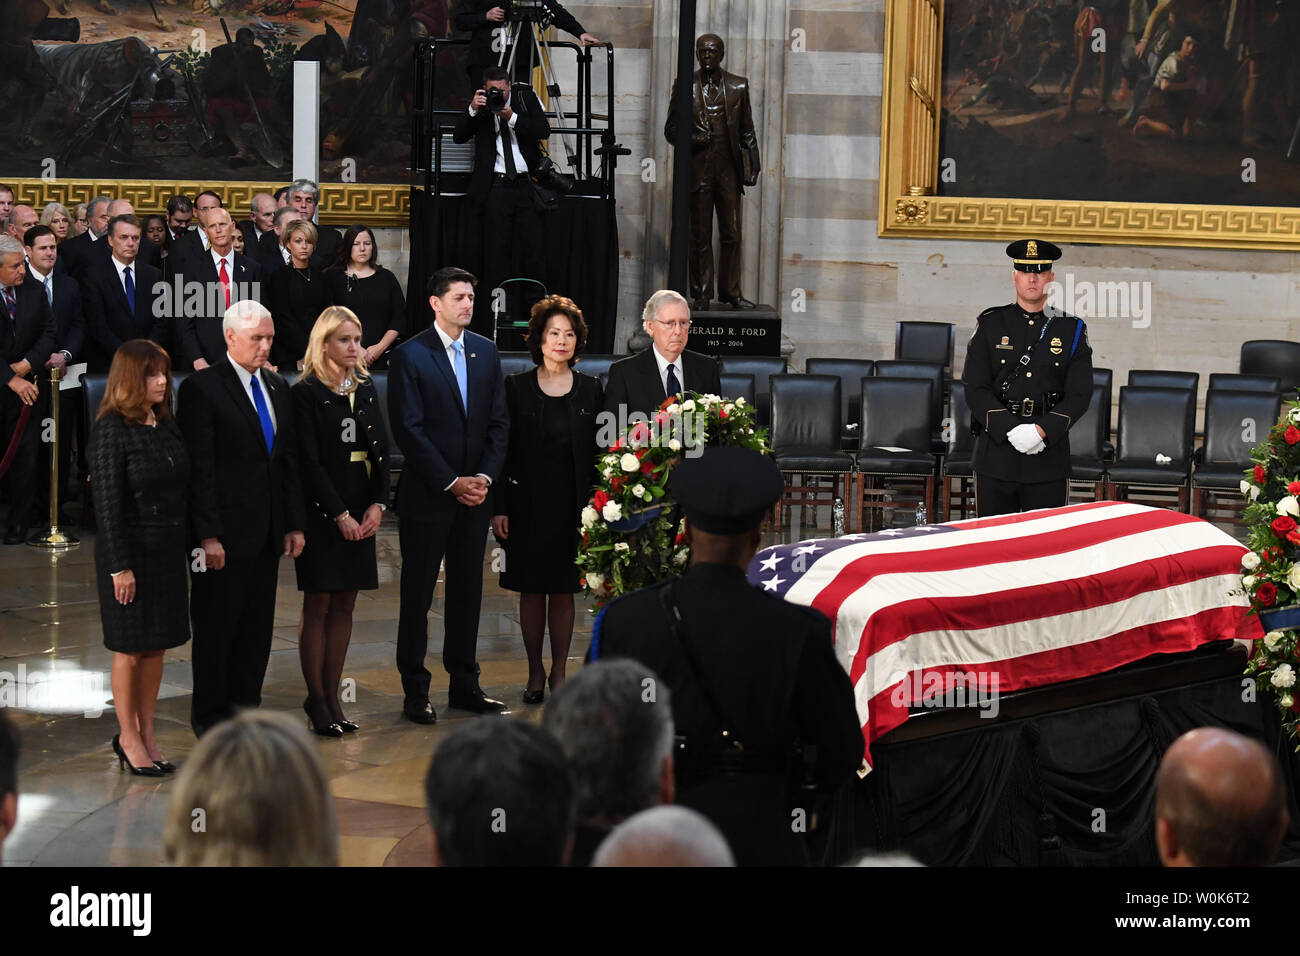 Vice President Mike Pence, Speaker of the House Paul Ryan, and Senate Majority Leader Mitch McConnell and spouses pay their respects by the casket of former Senator John McCain as he lies in state at the U.S. Capitol in Washington, DC on Friday, August 31, 2018.  McCain, an Arizona Republican, presidential candidate, and war hero, died August 25th at the age of 81. He is the 31st person to lie in state at the Capitol in 166 years.    Photo by Pat Benic/UPI Stock Photo